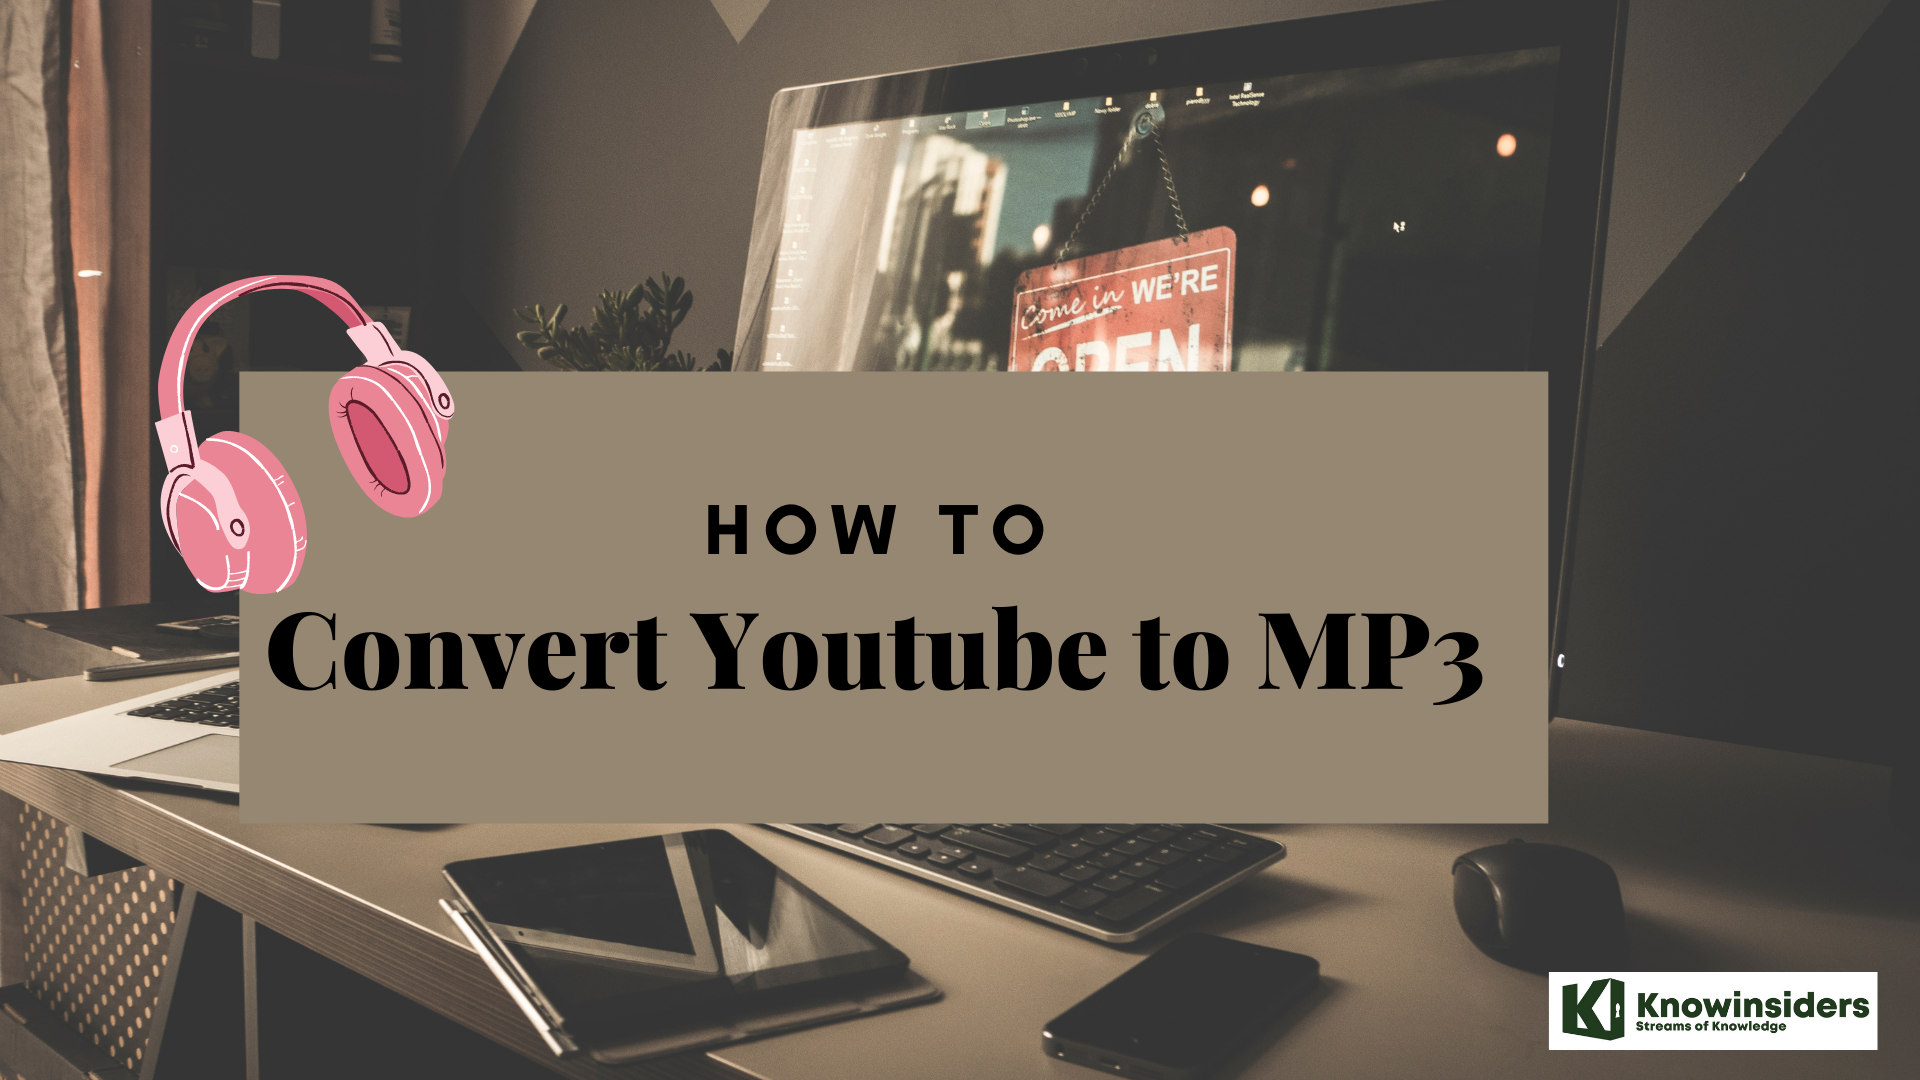 How to convert Youtube videos to MP3 